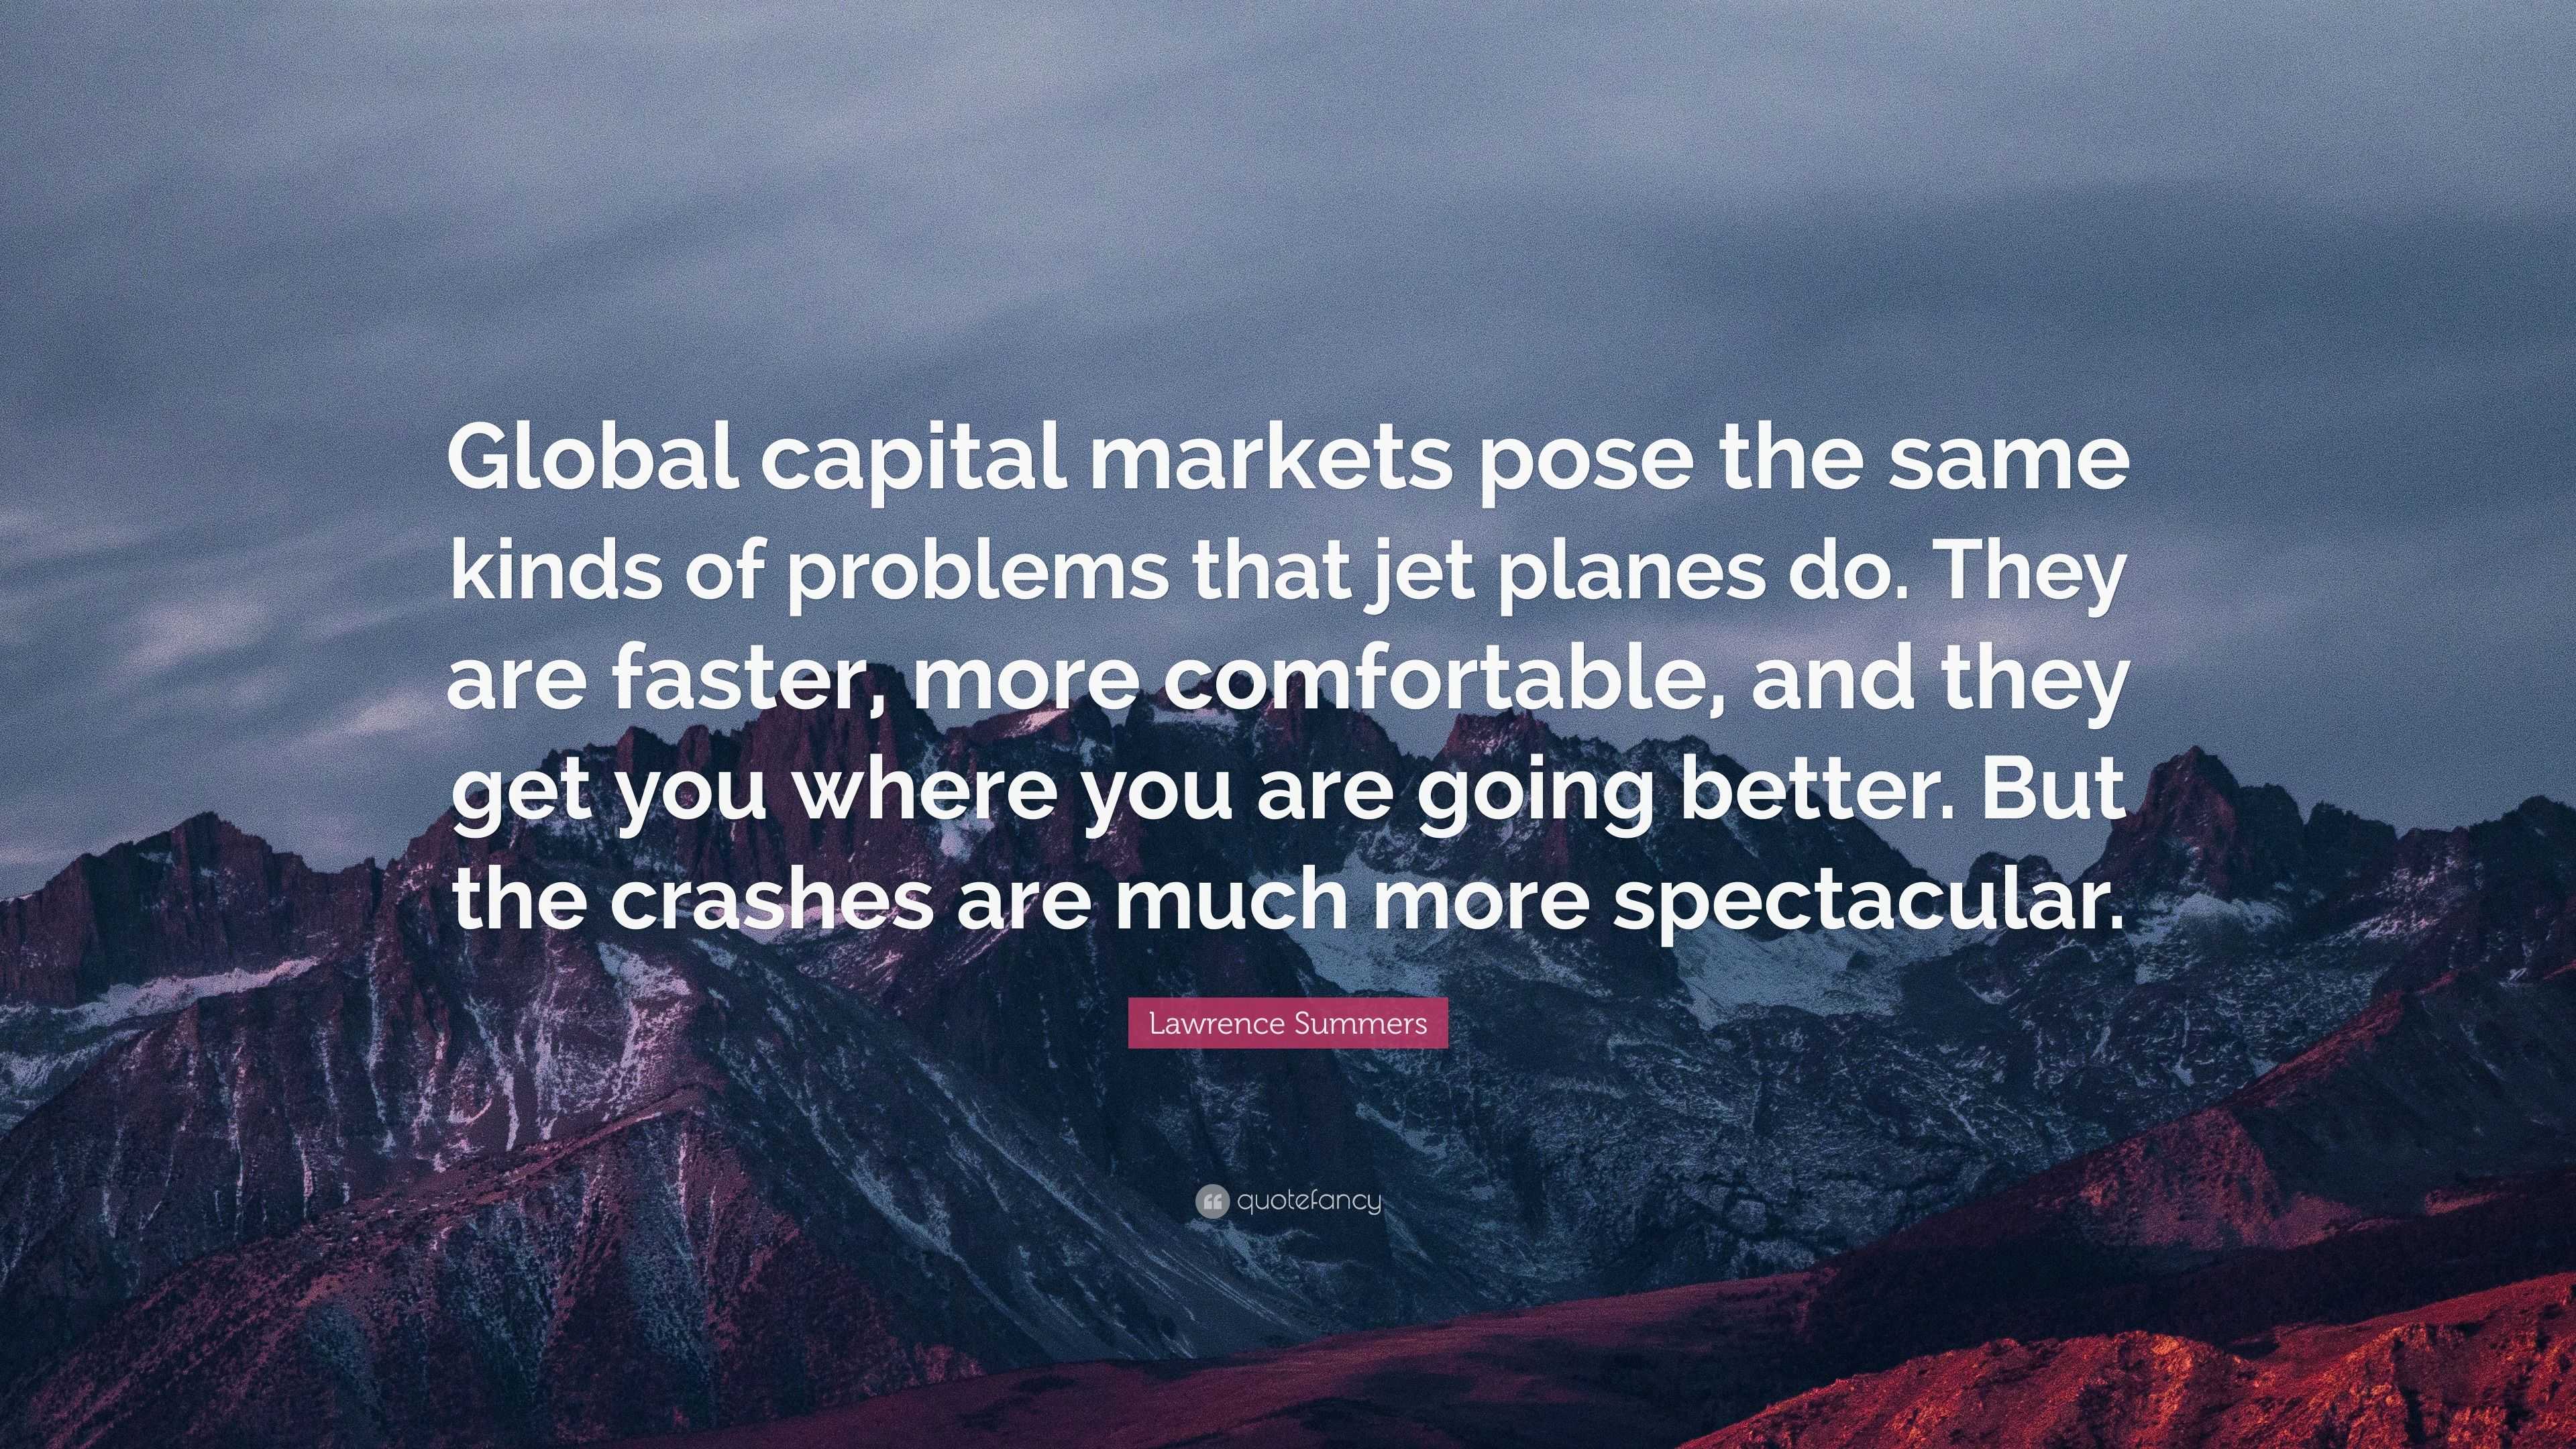 3323114 Lawrence Summers Quote Global capital markets pose the same kinds